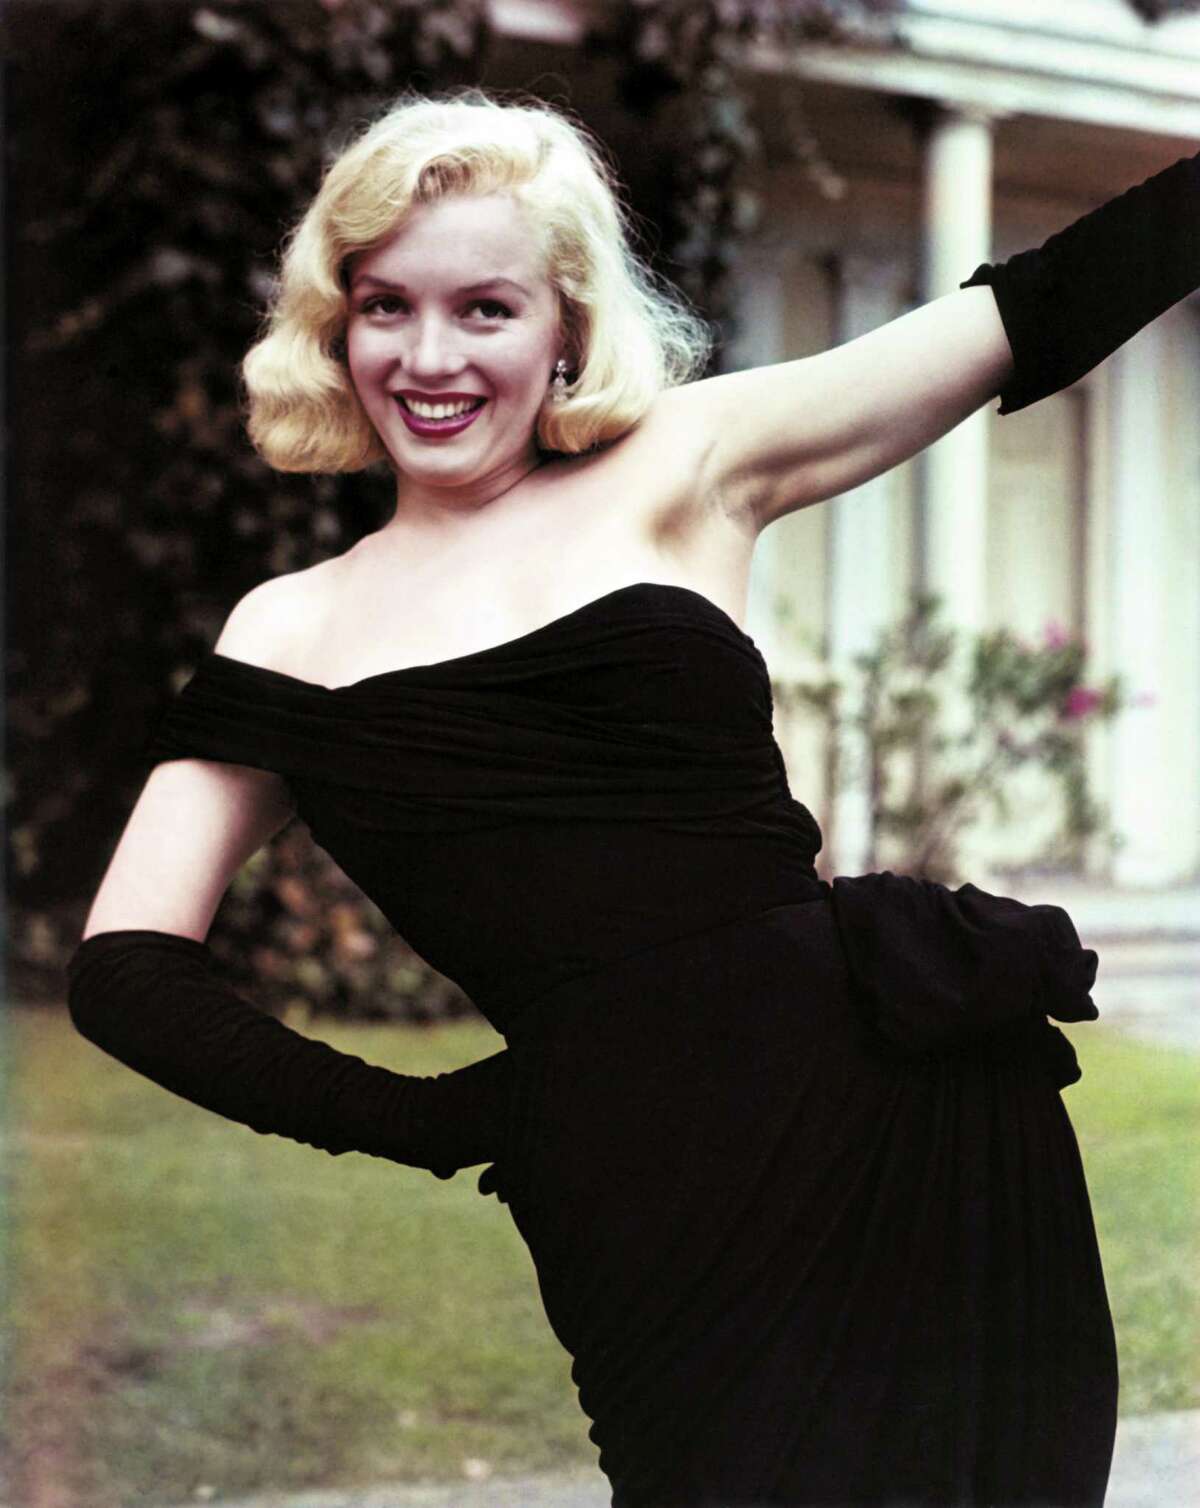 On this day in 1962, Marilyn Monroe sang 'Happy Birthday to You' to